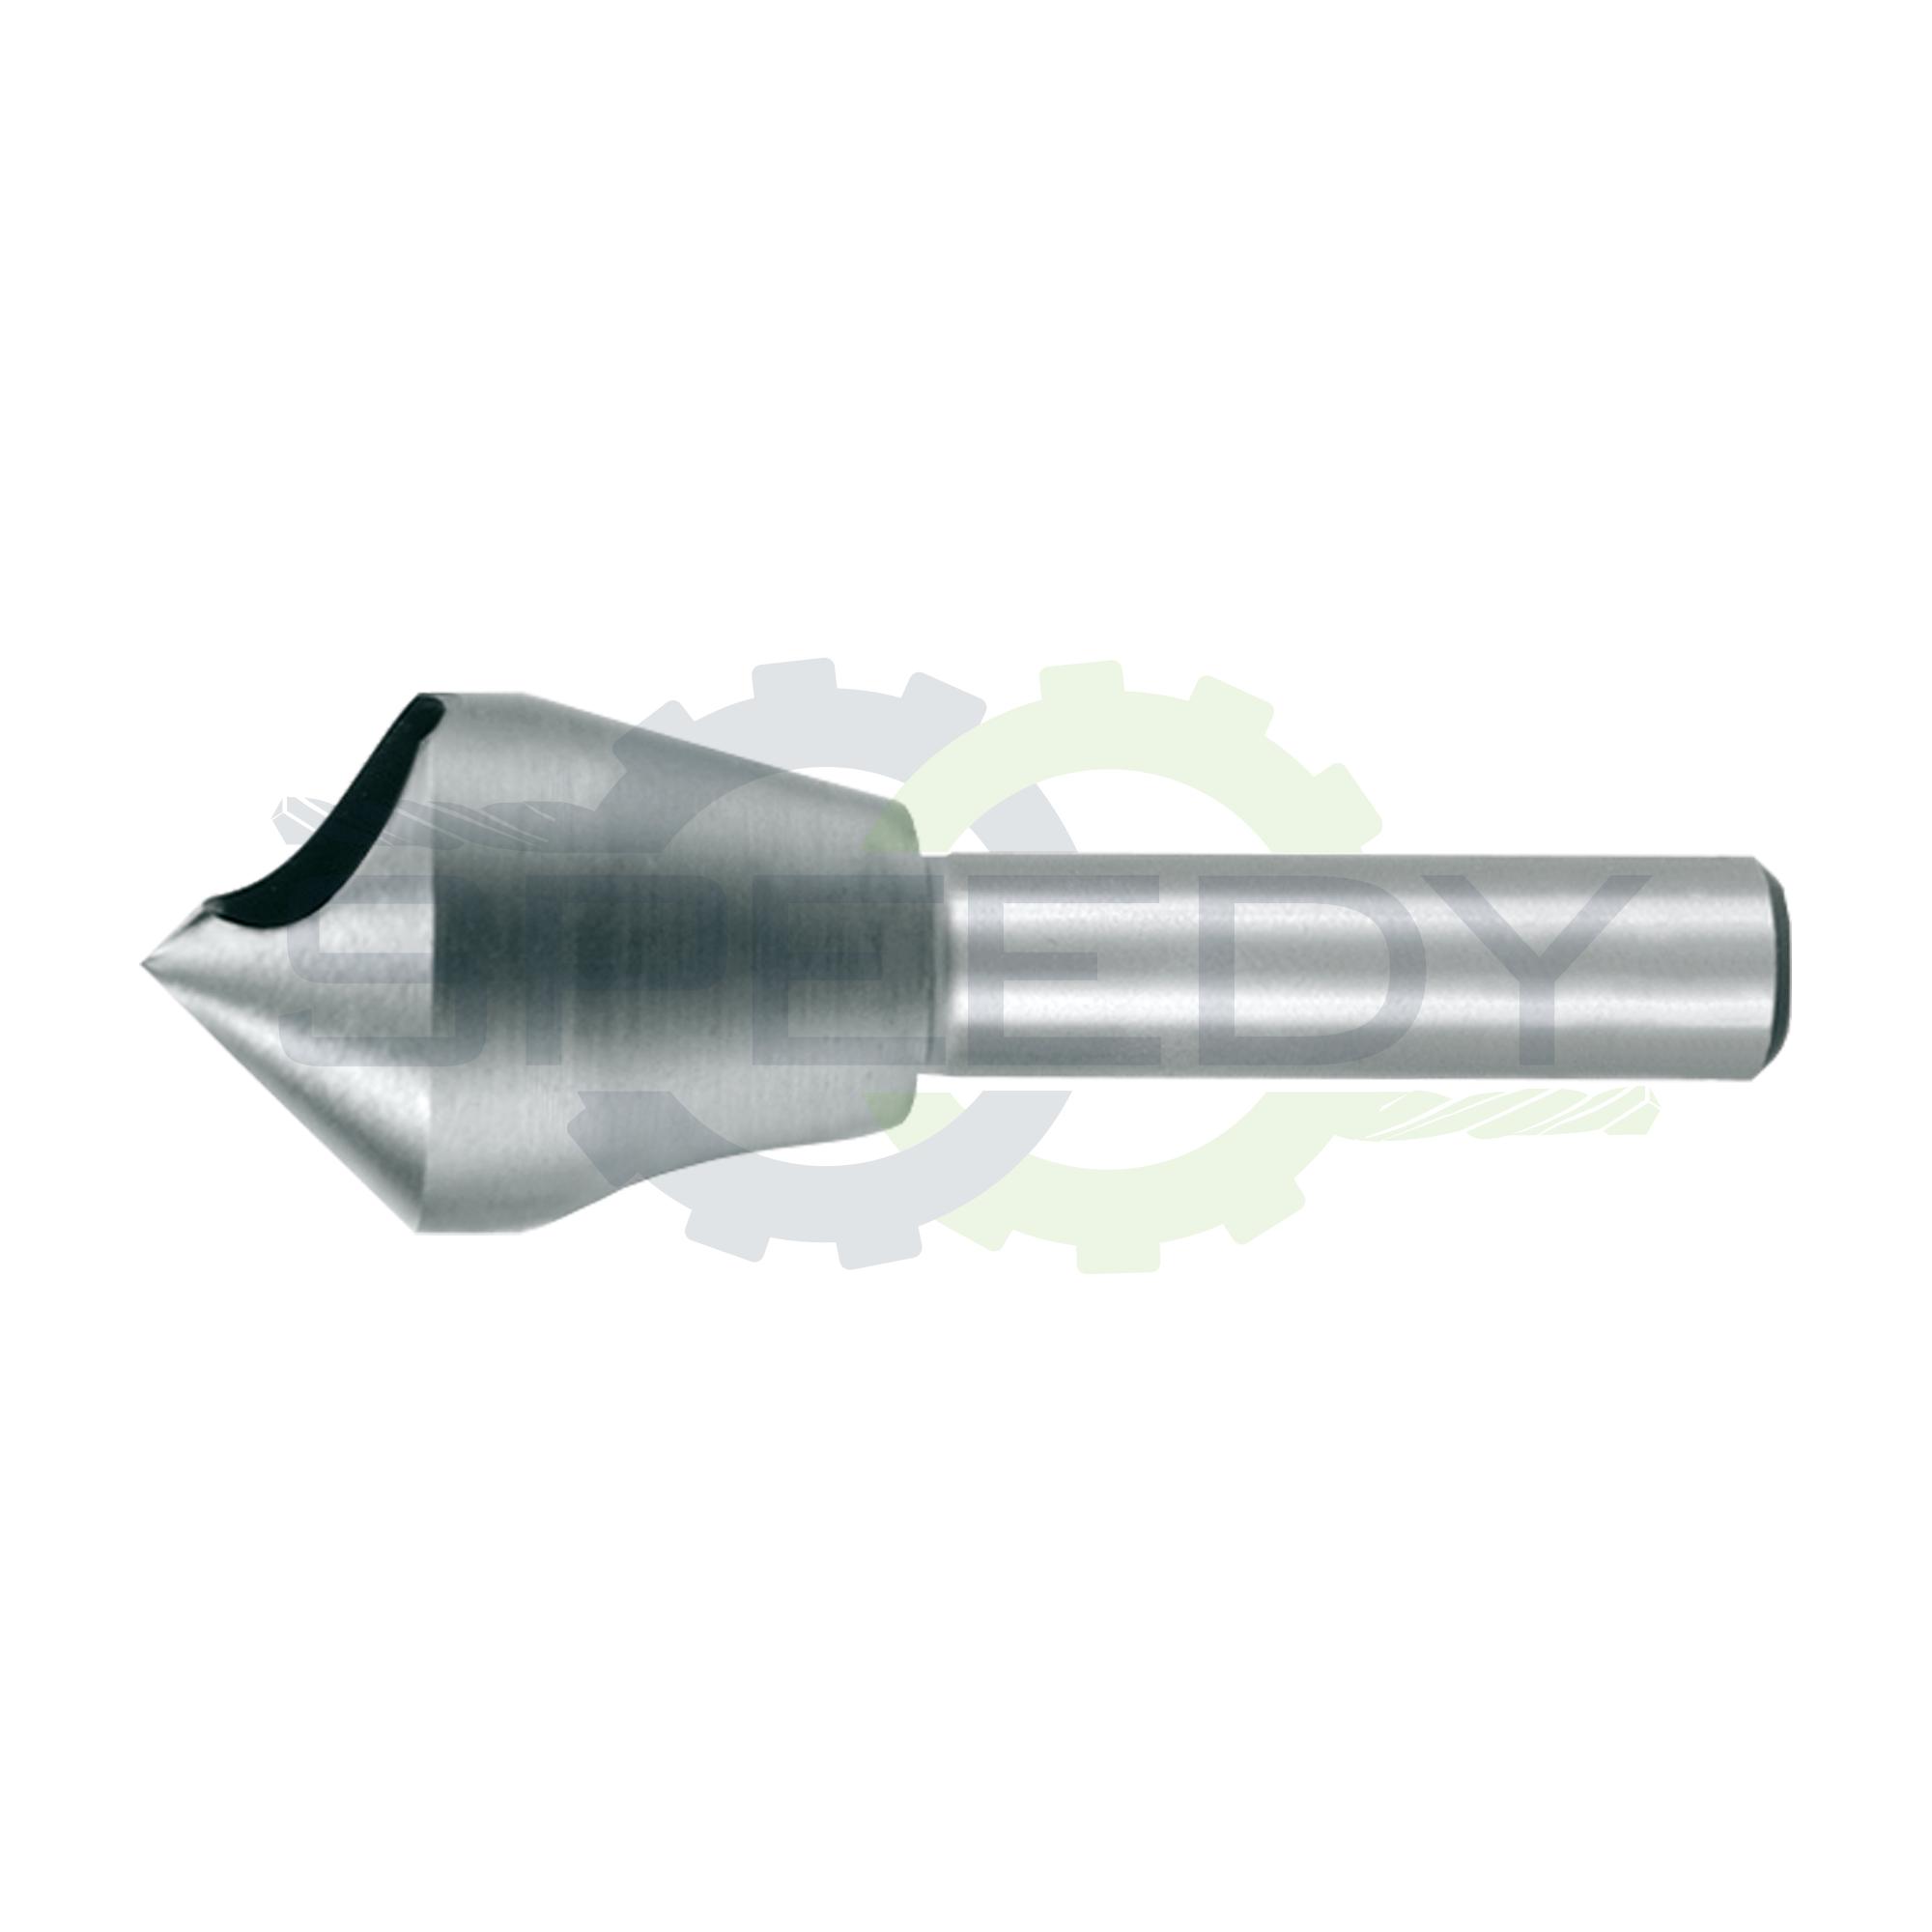 Slotted taper and deburring countersinkers 90° 